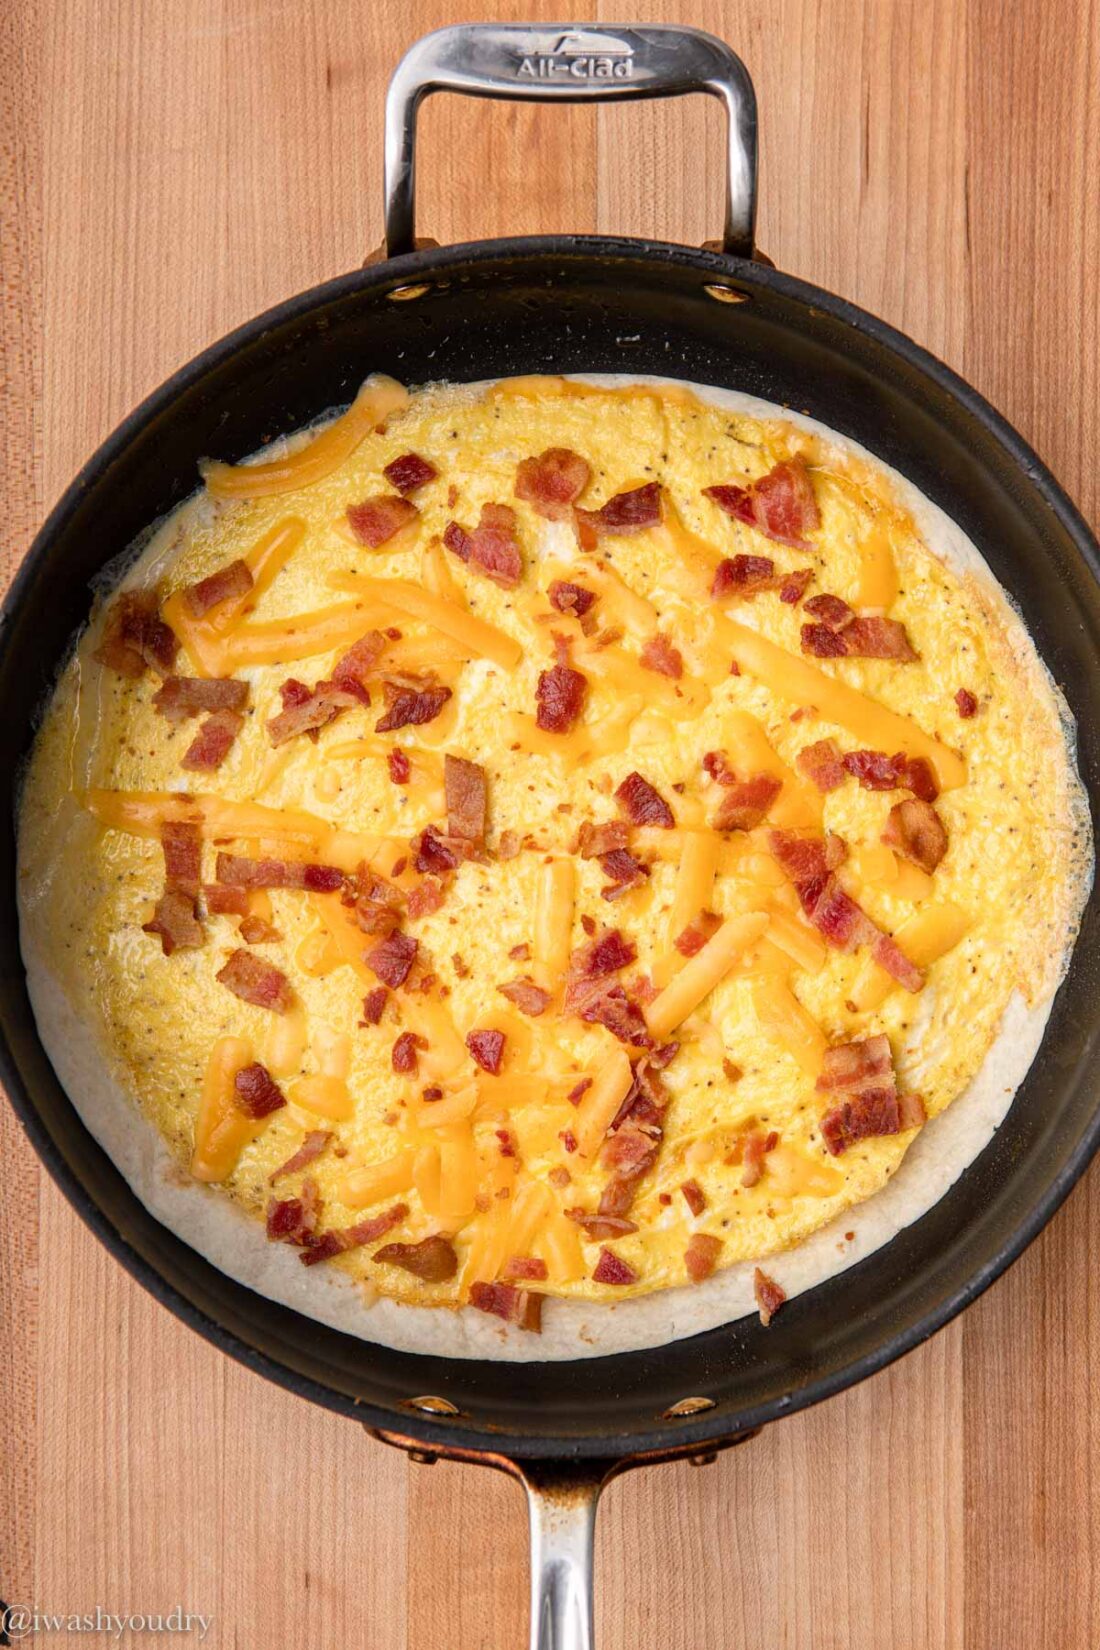 Cooked eggs, cheese, and bacon on tortilla in frying pan.